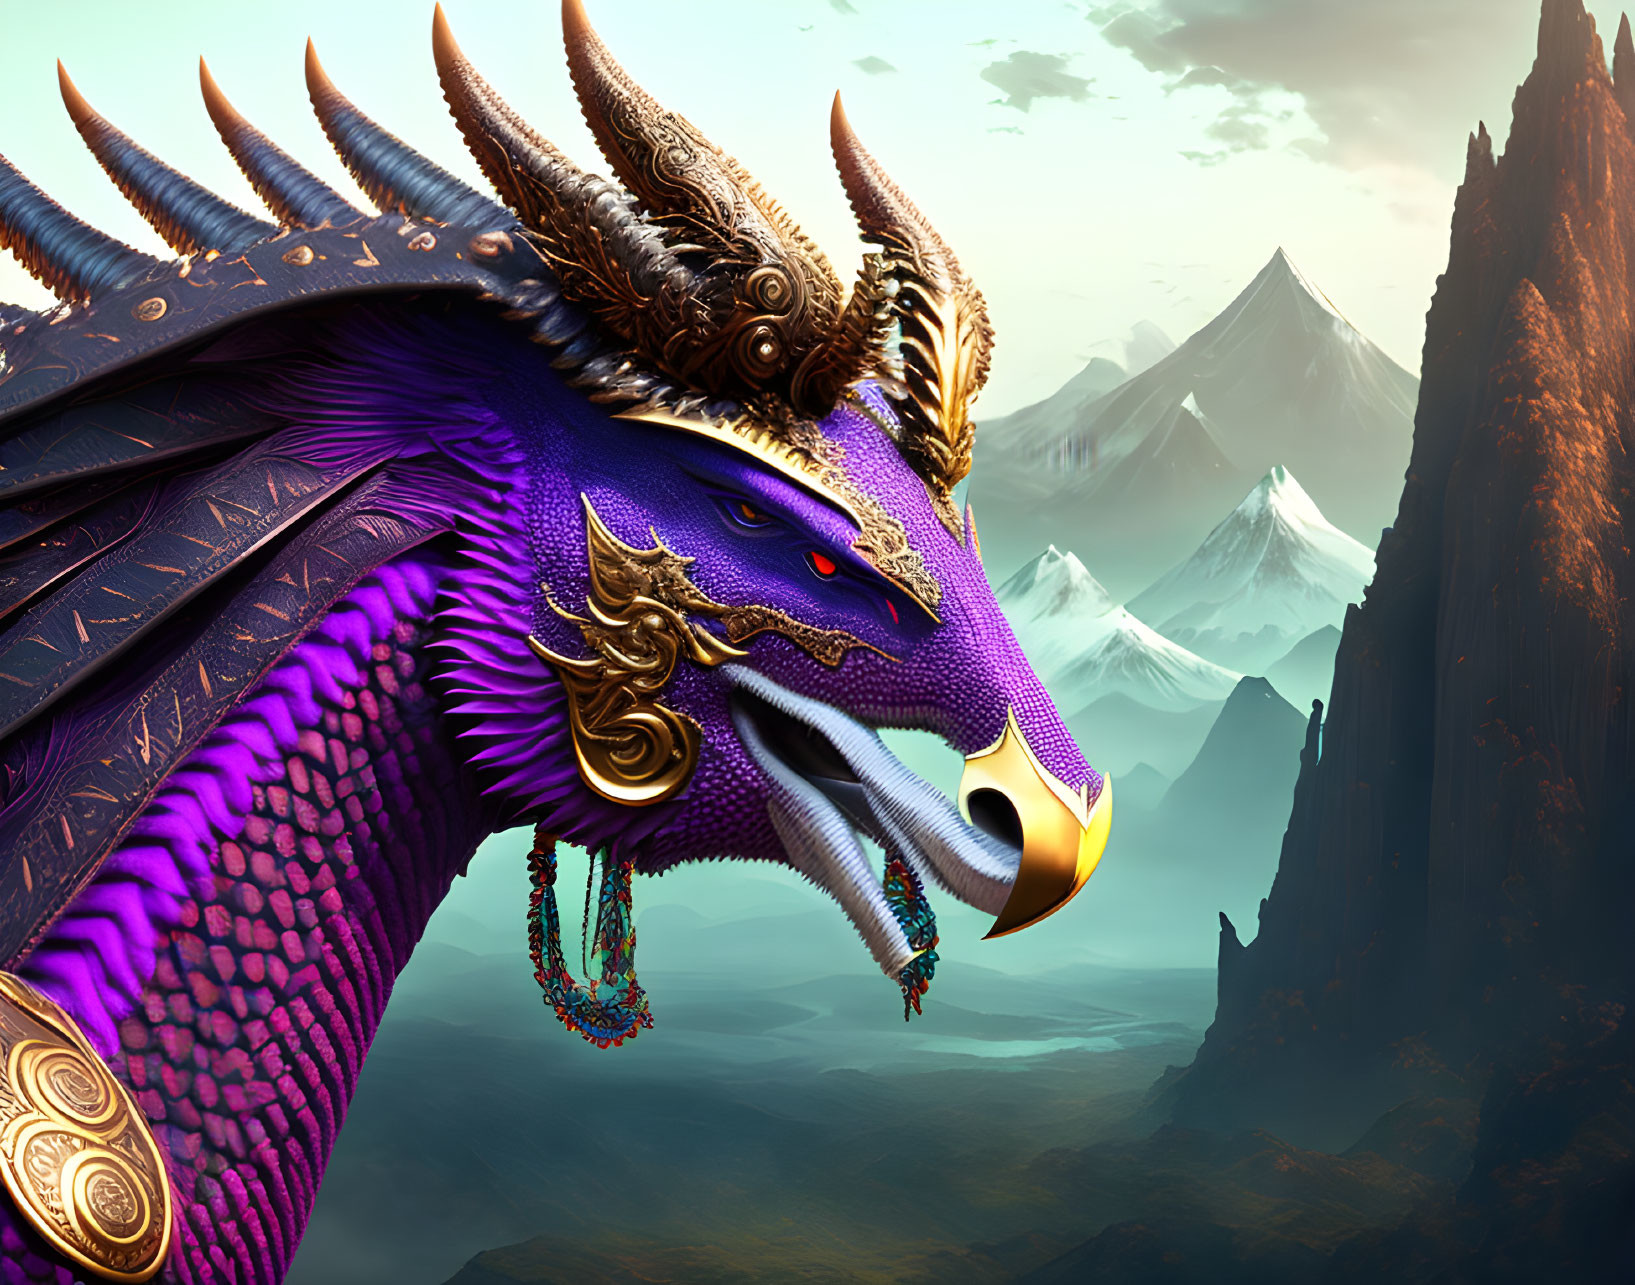 Majestic purple dragon with golden horns in mountainous scenery